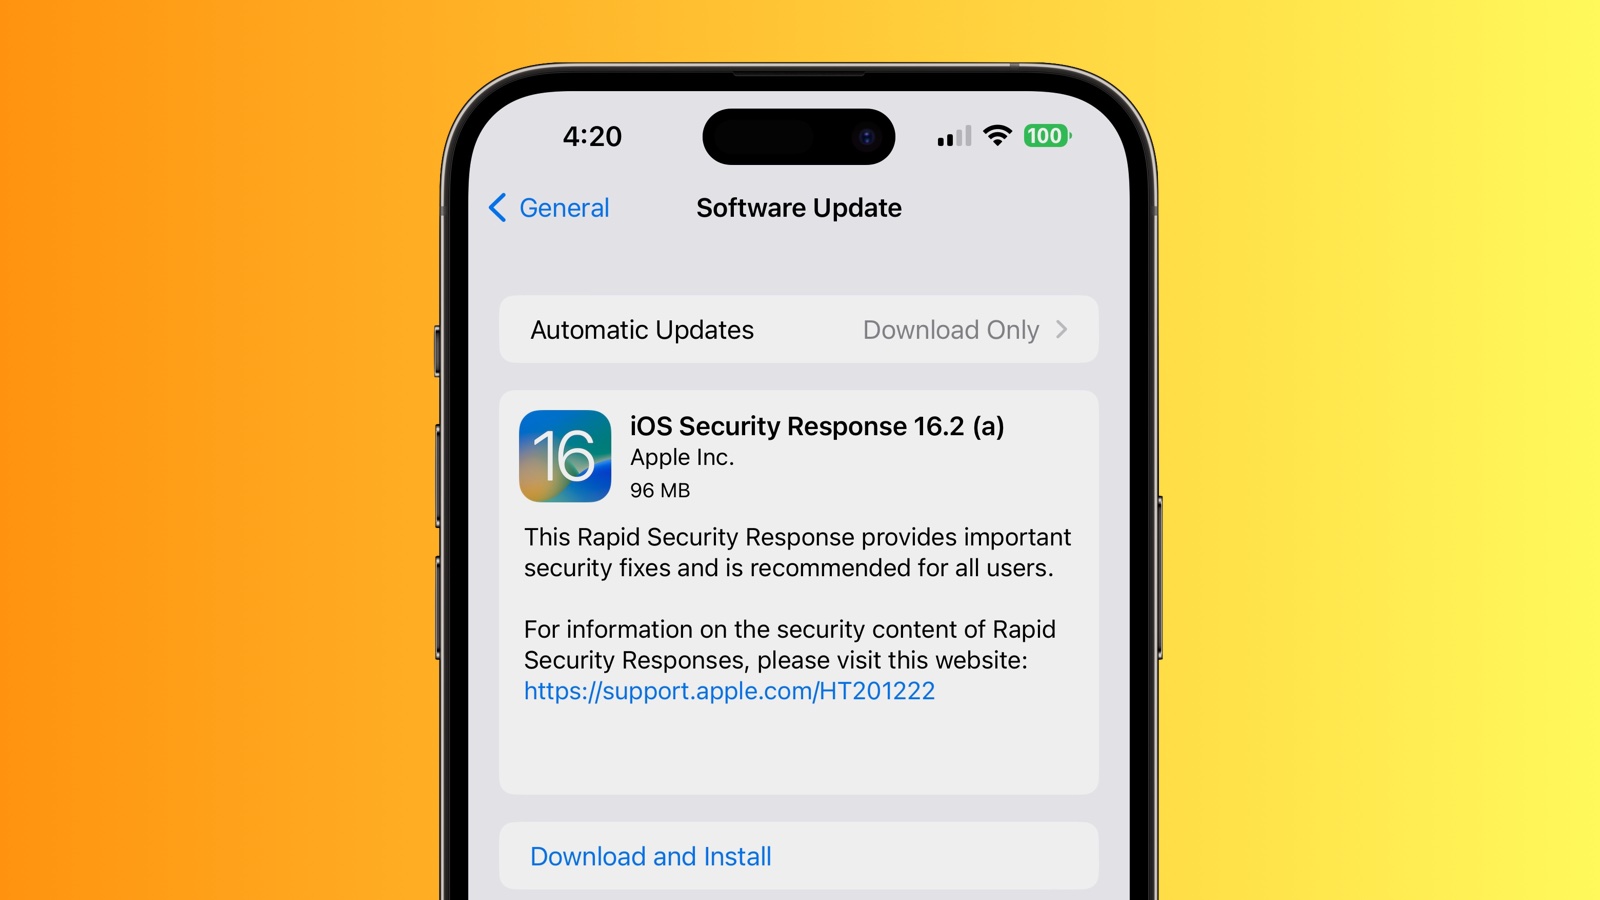 Apple Releases Rapid Security Response Update for iOS 16.2 Beta Users